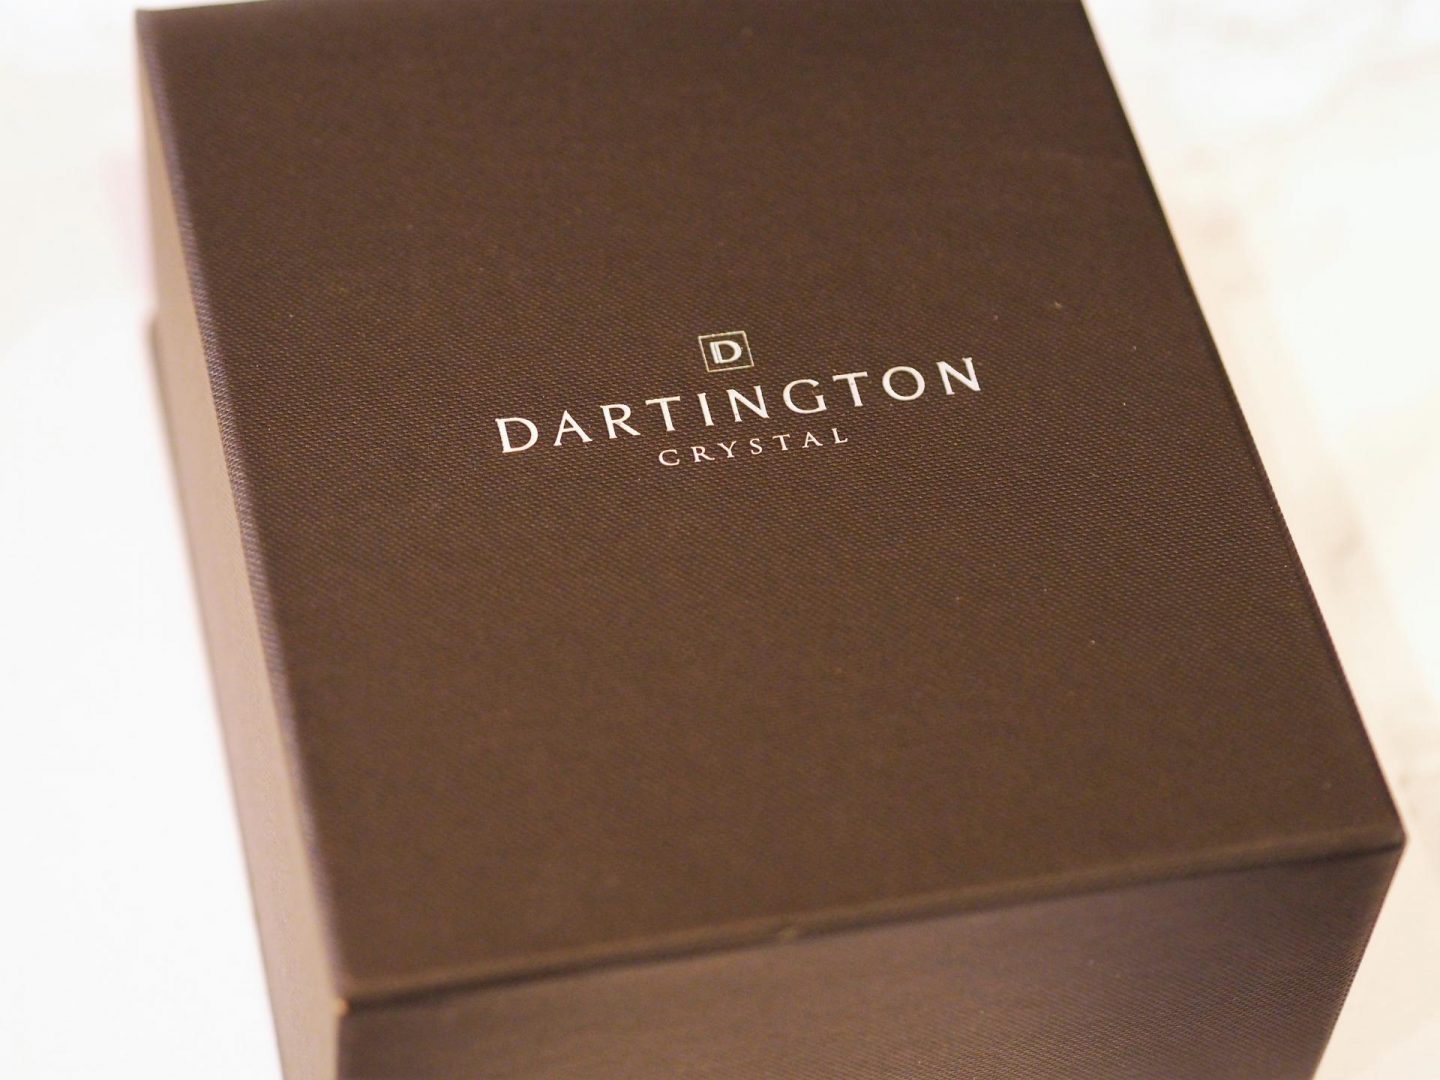 Dartington Small Curve Black Clock and Christmas Gifts for Men